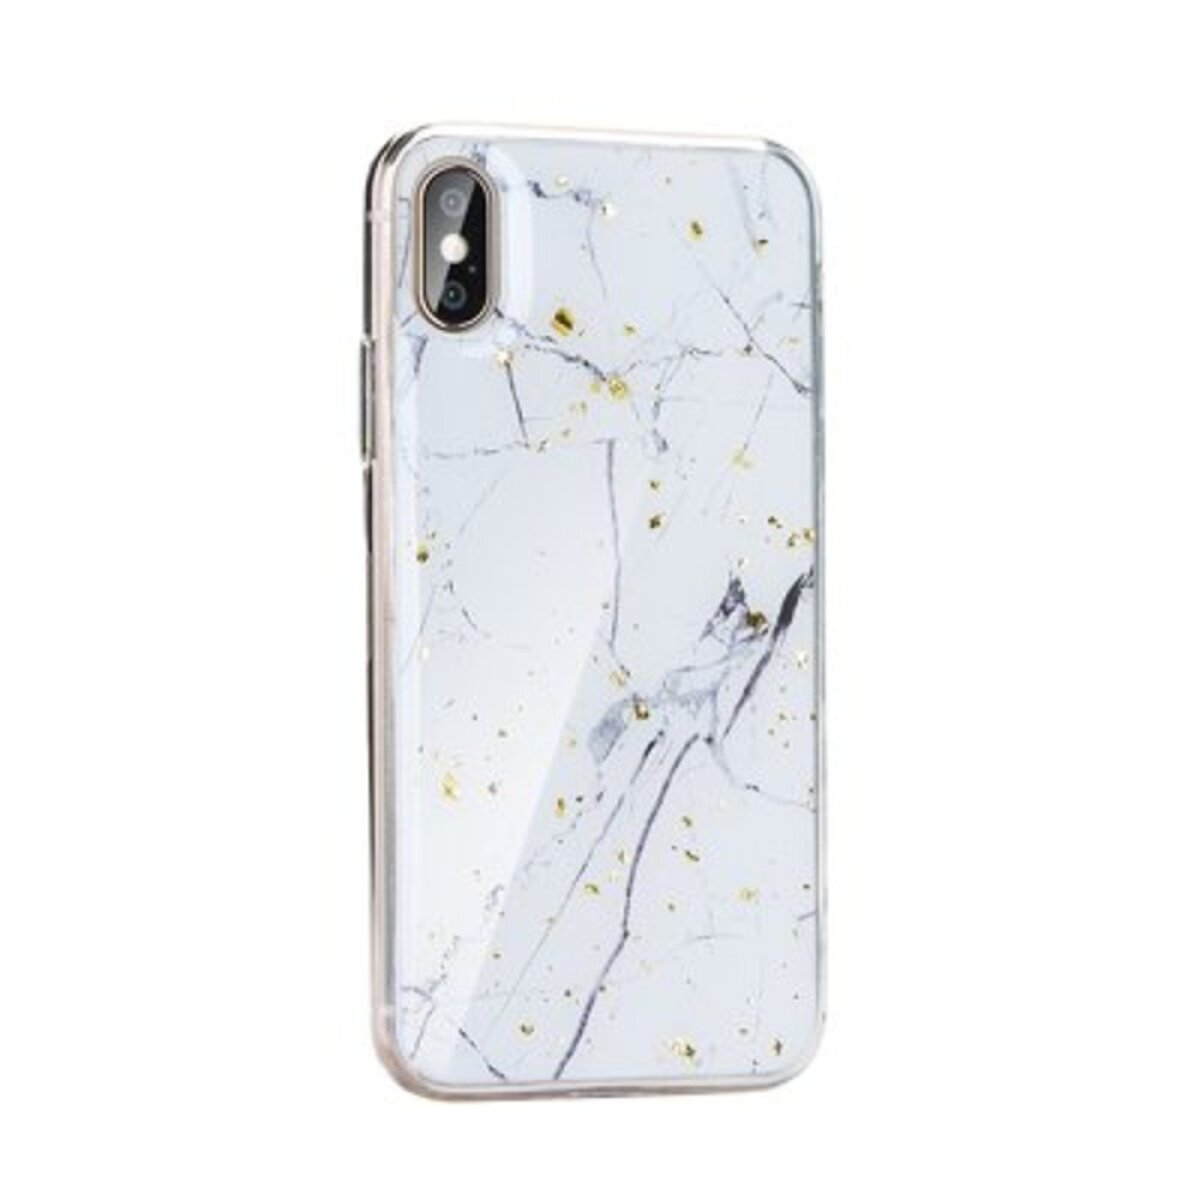 Y7 design available 2019, MARBLE Huawei, Not Y7 Bookcover, Case FORCELL 2019 1,